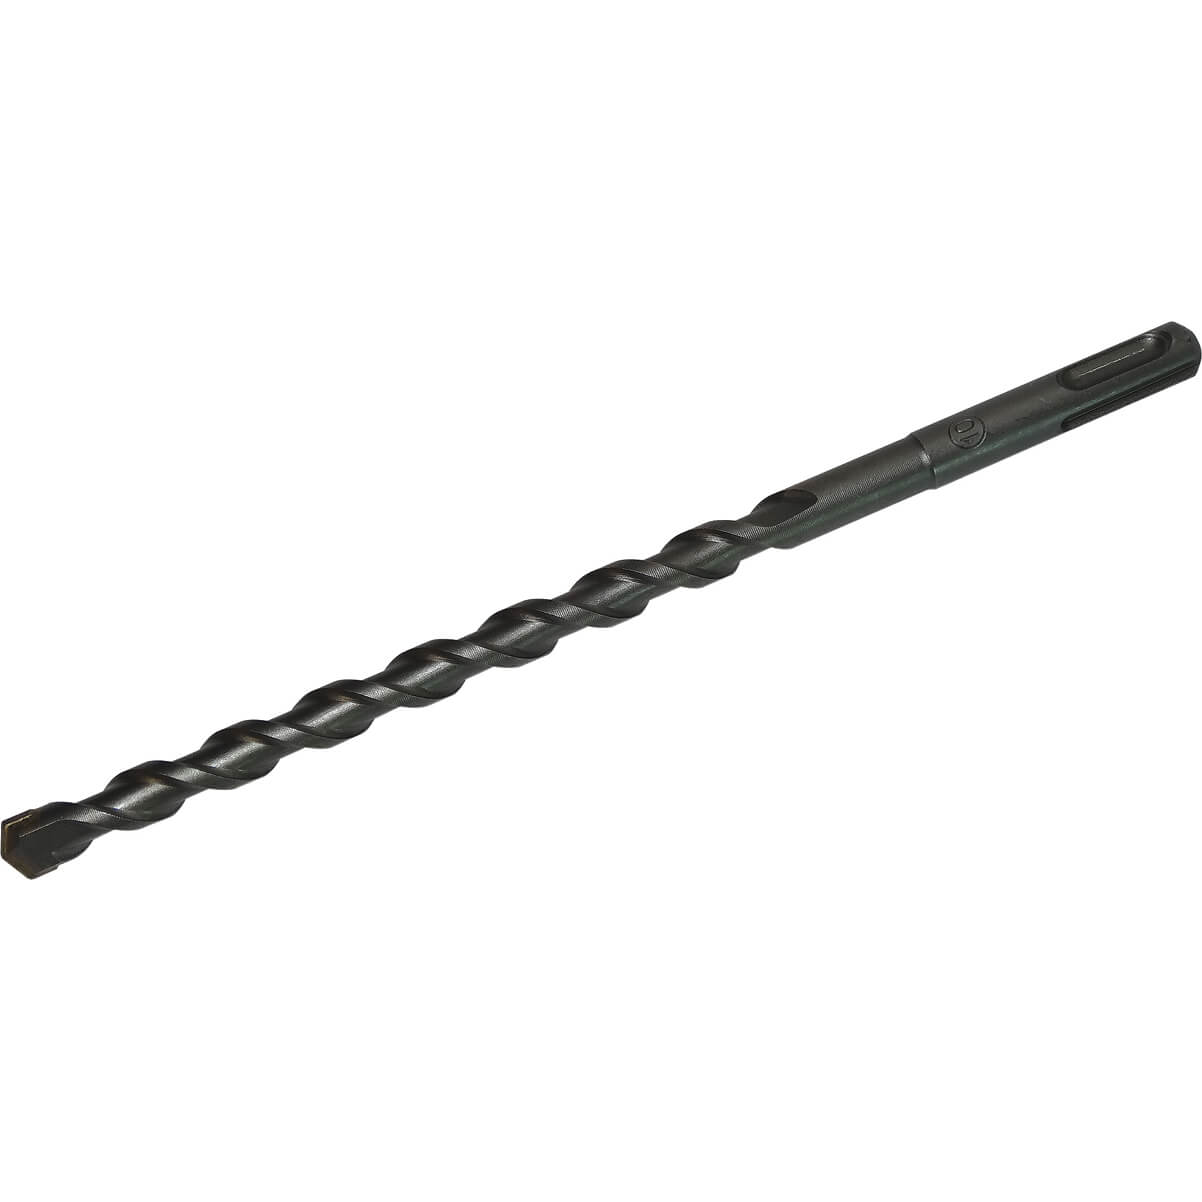 Image of CK SDS Plus Masonry Drill Bit 14mm 450mm Pack of 1